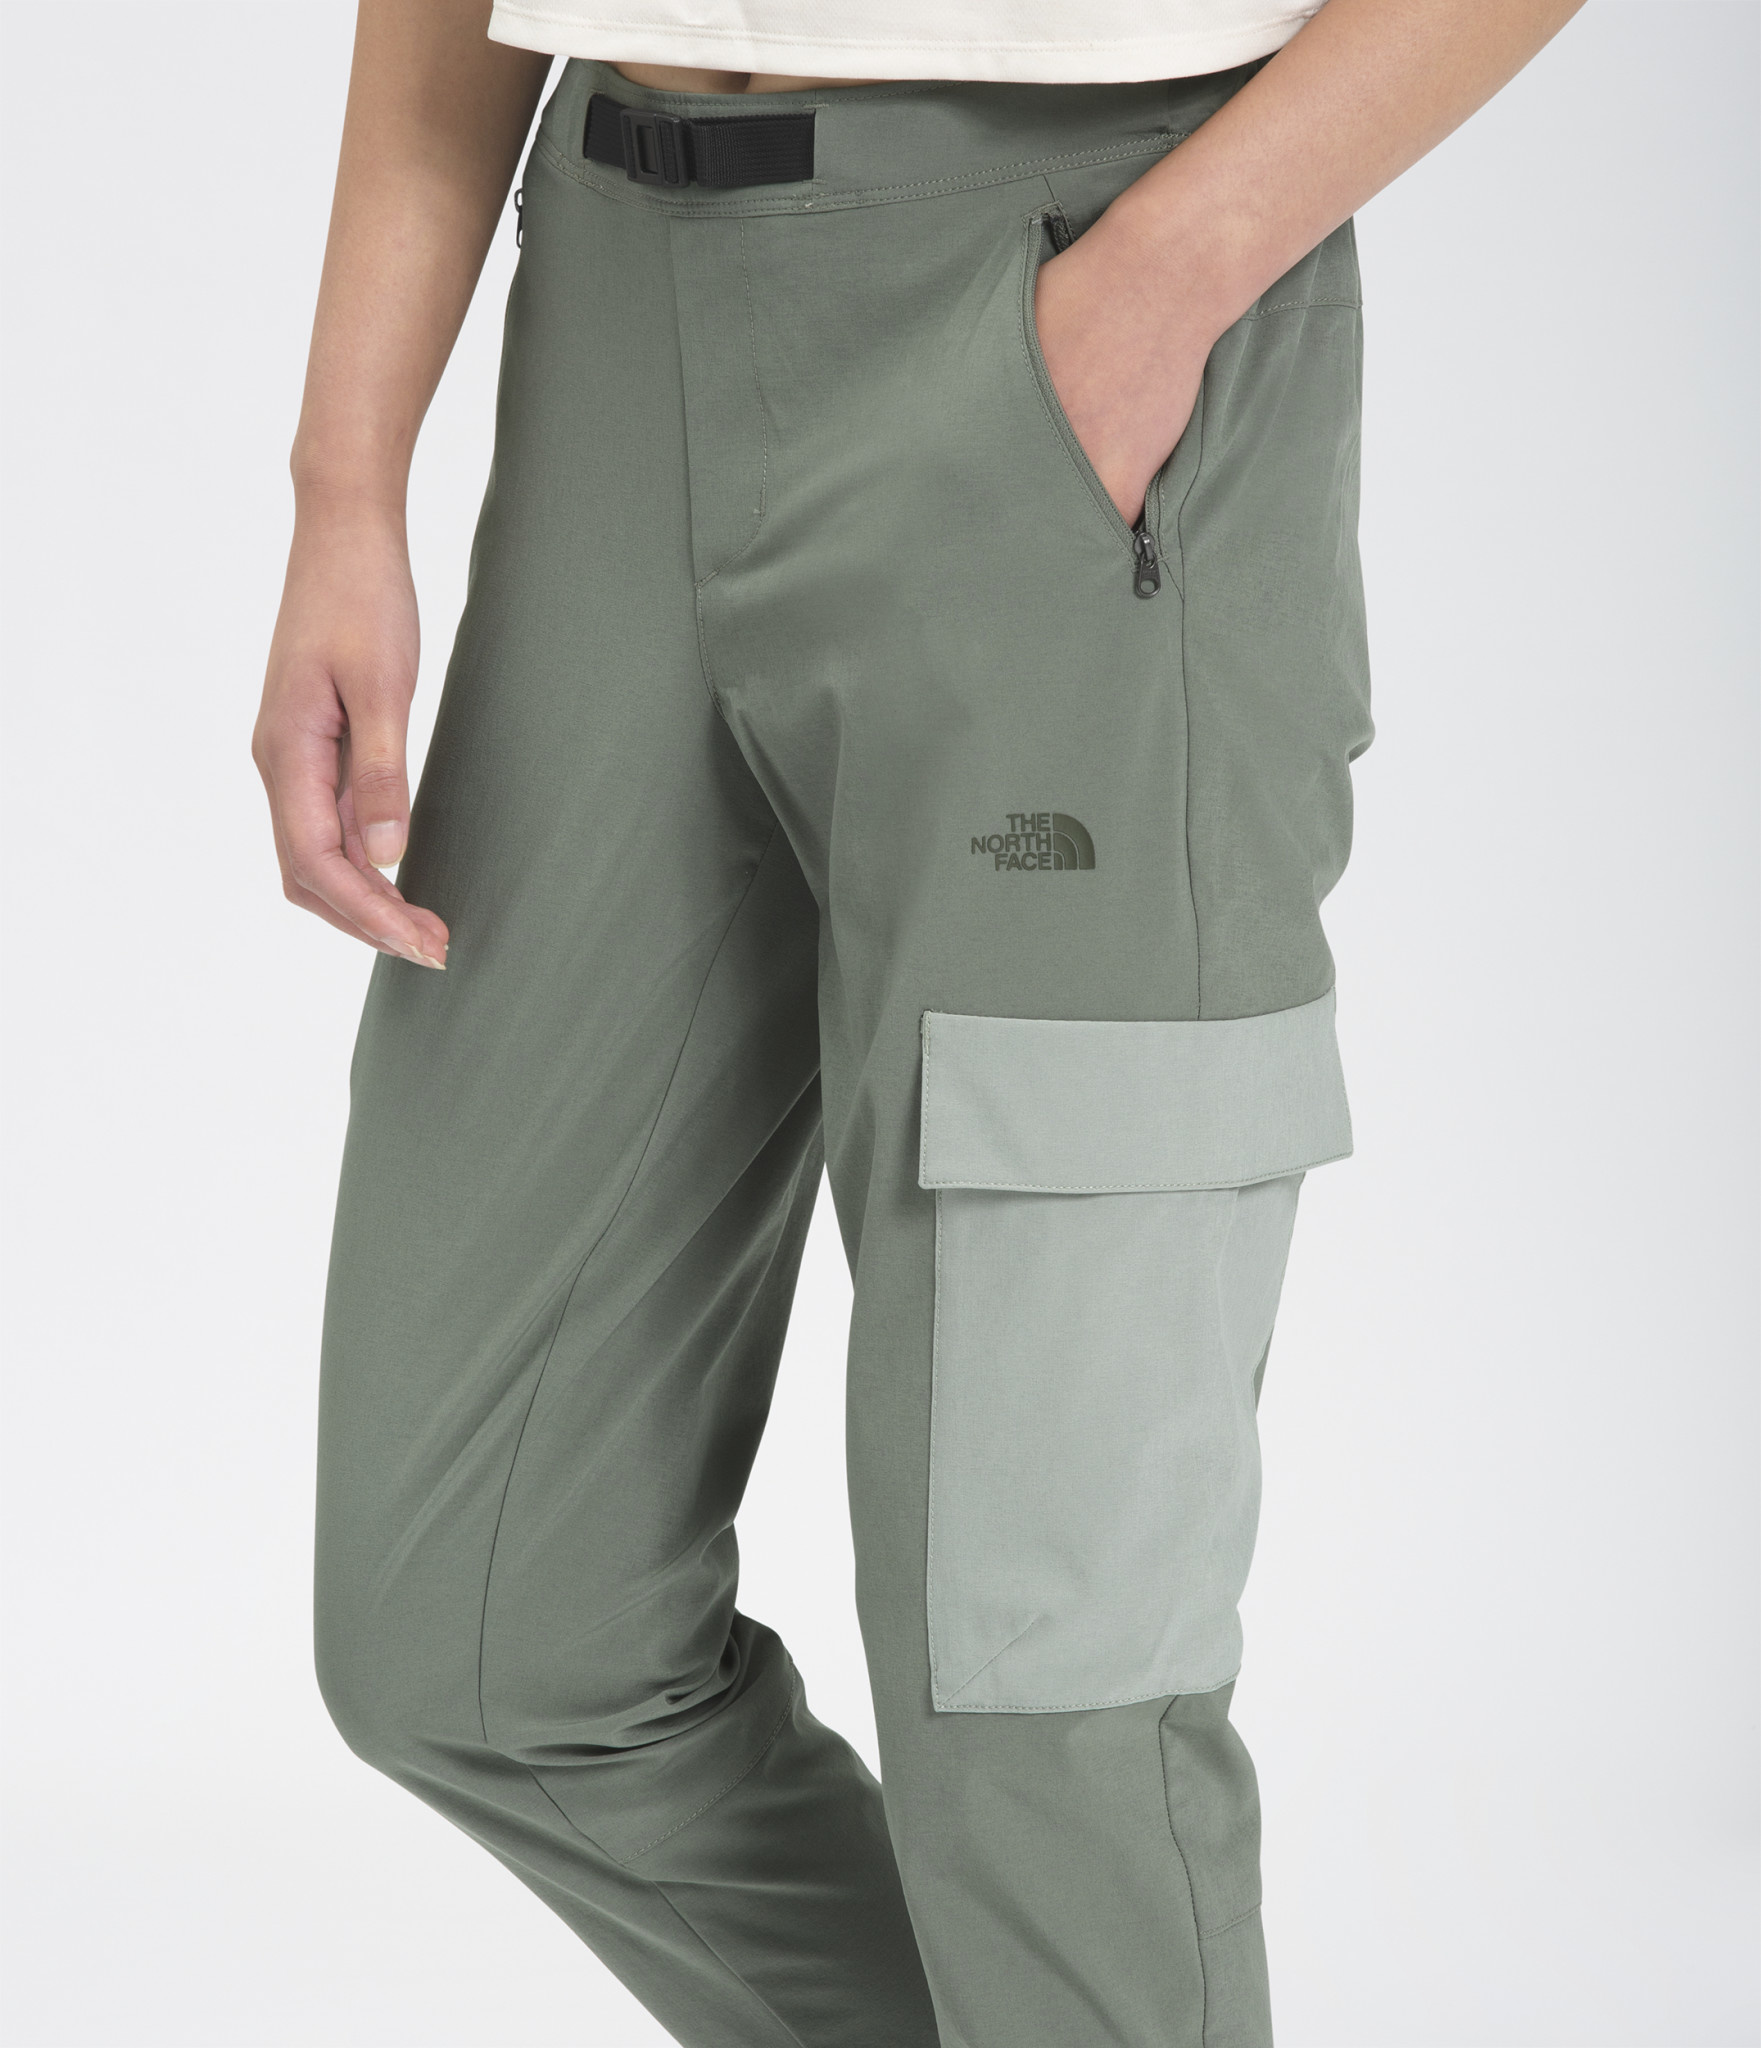 The North Face Women's Bridgeway Pant - Outtabounds